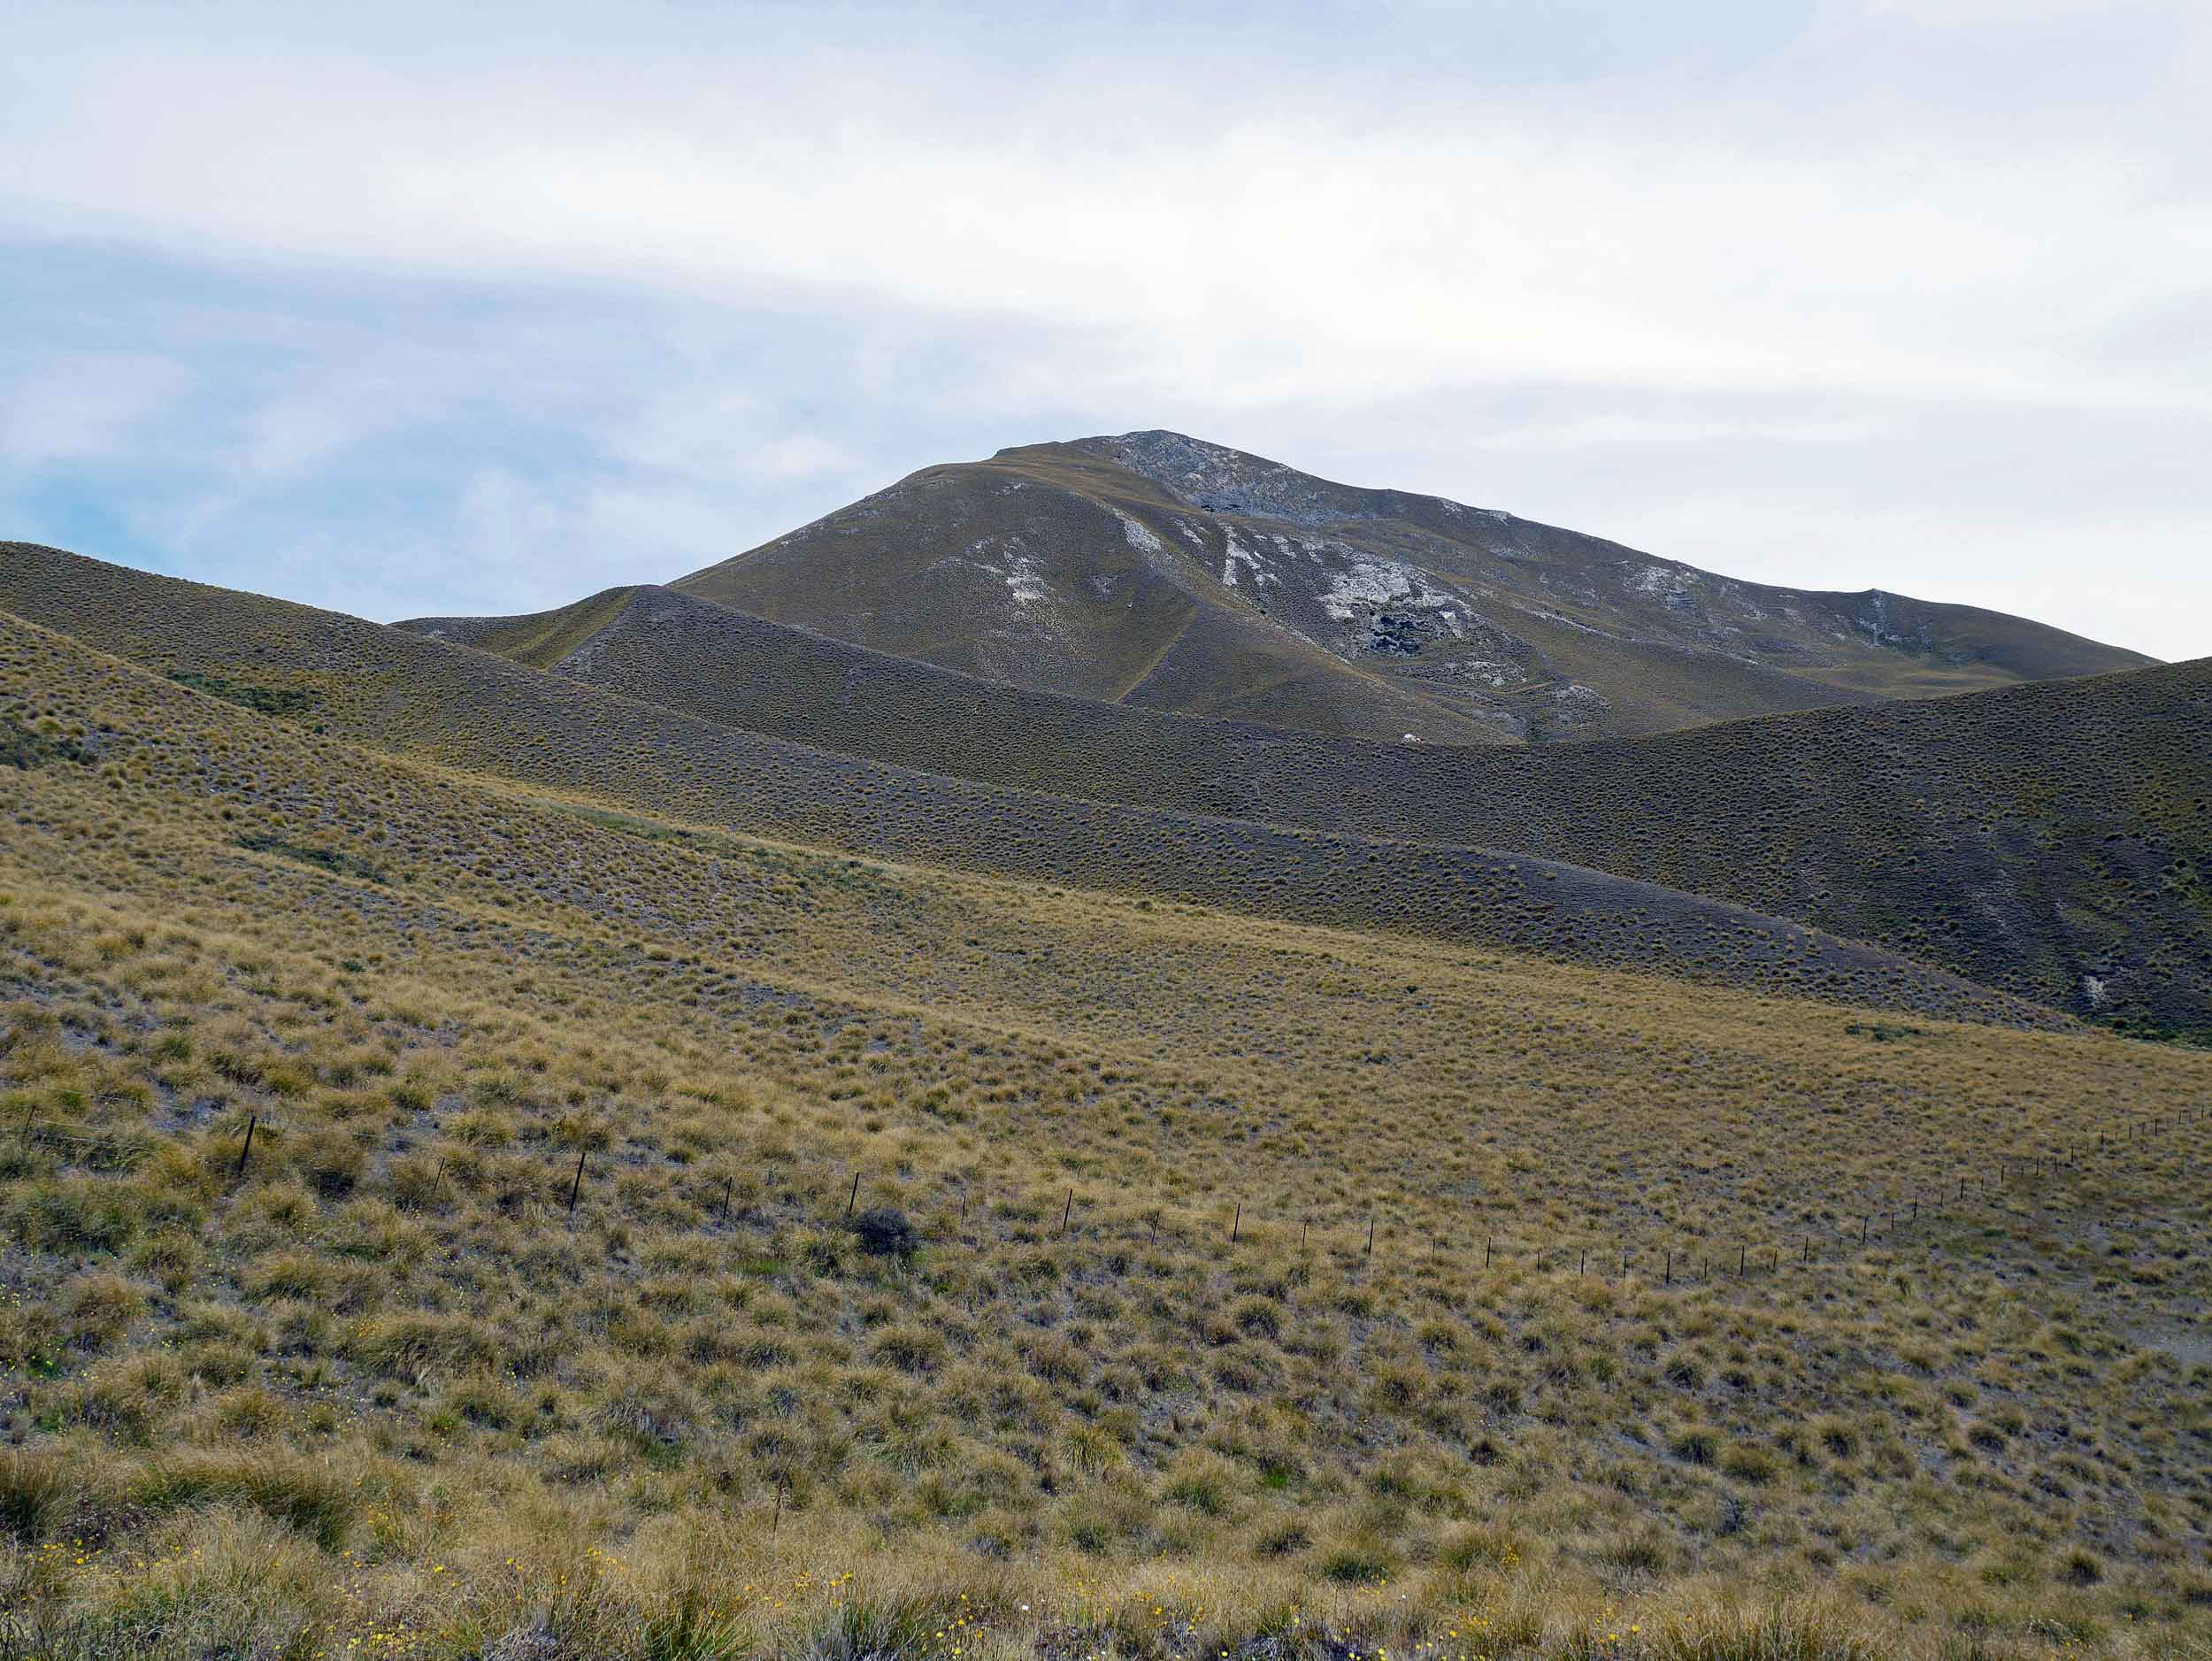  Driving north past Queenstown, the landscape becomes hot and arid with hills covered in tussock (Jan 10).&nbsp; 